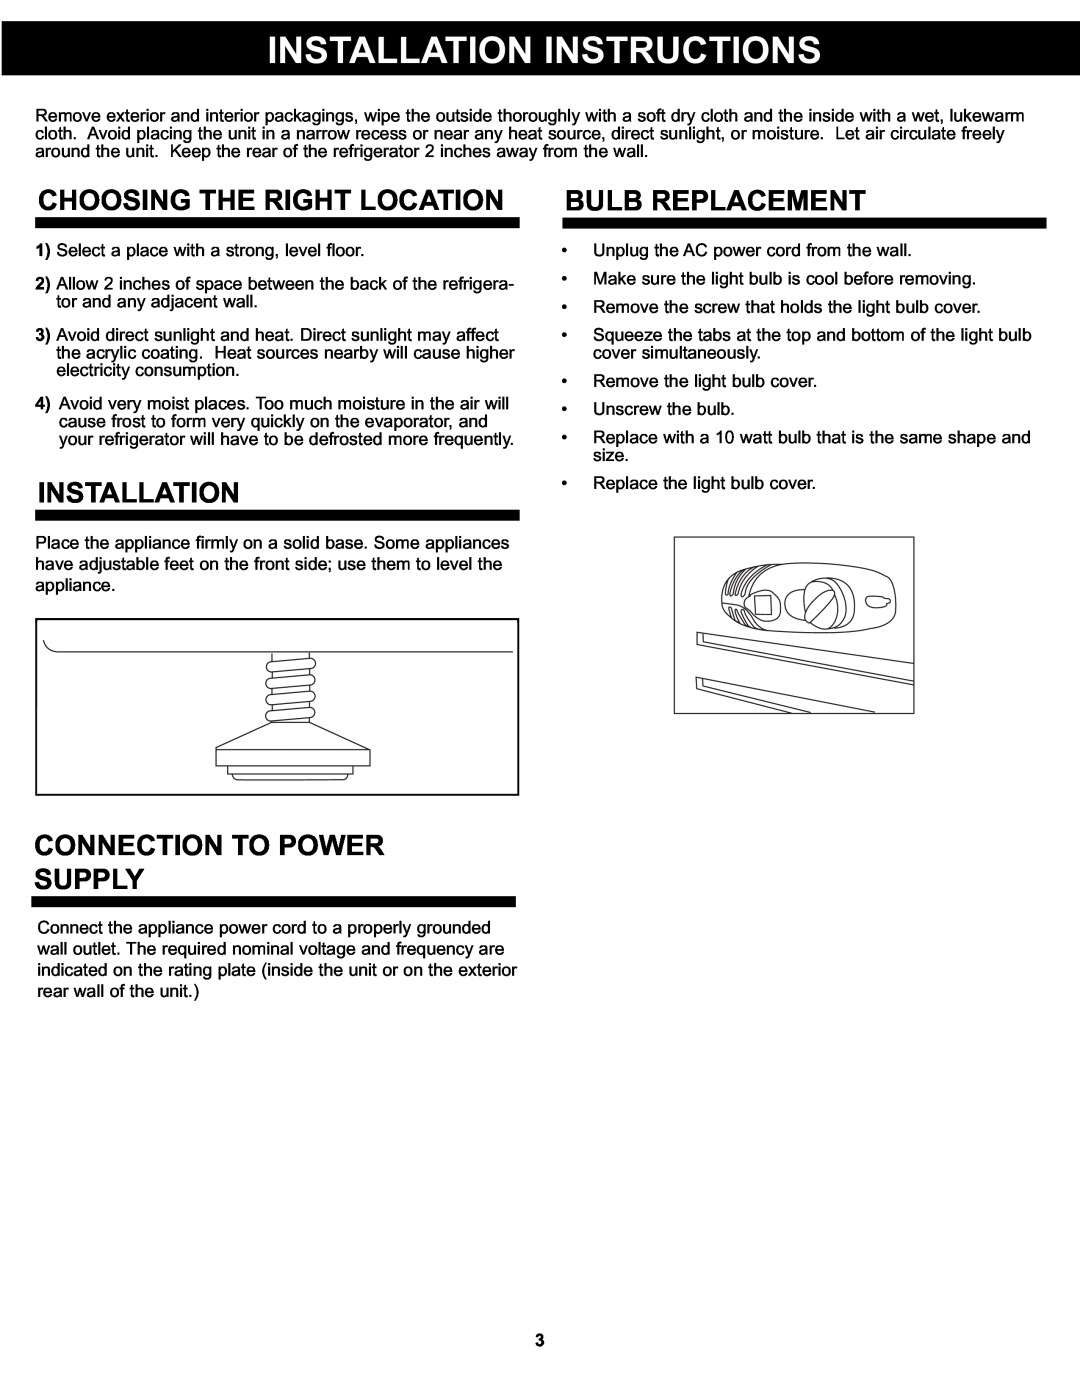 Danby DPF074B1WDB Installation Instructions, Choosing The Right Location, Connection To Power Supply, Bulb Replacement 